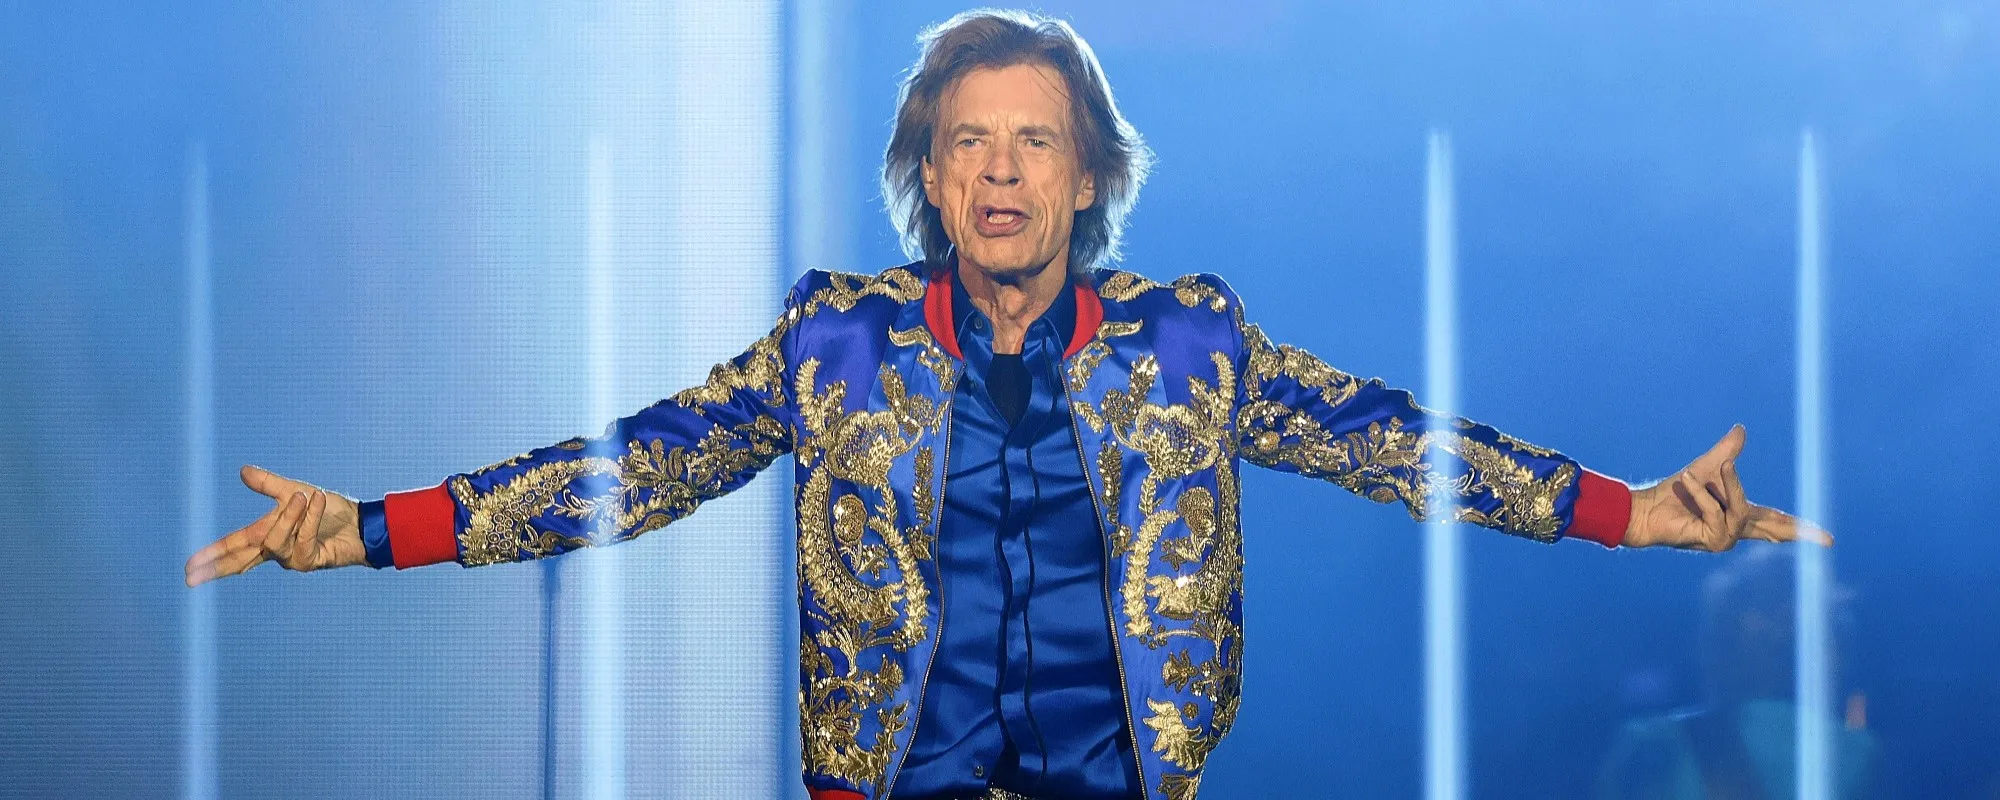 Moves Like Jagger: Check Out the Rolling Stones Frontman’s Gym Playlist